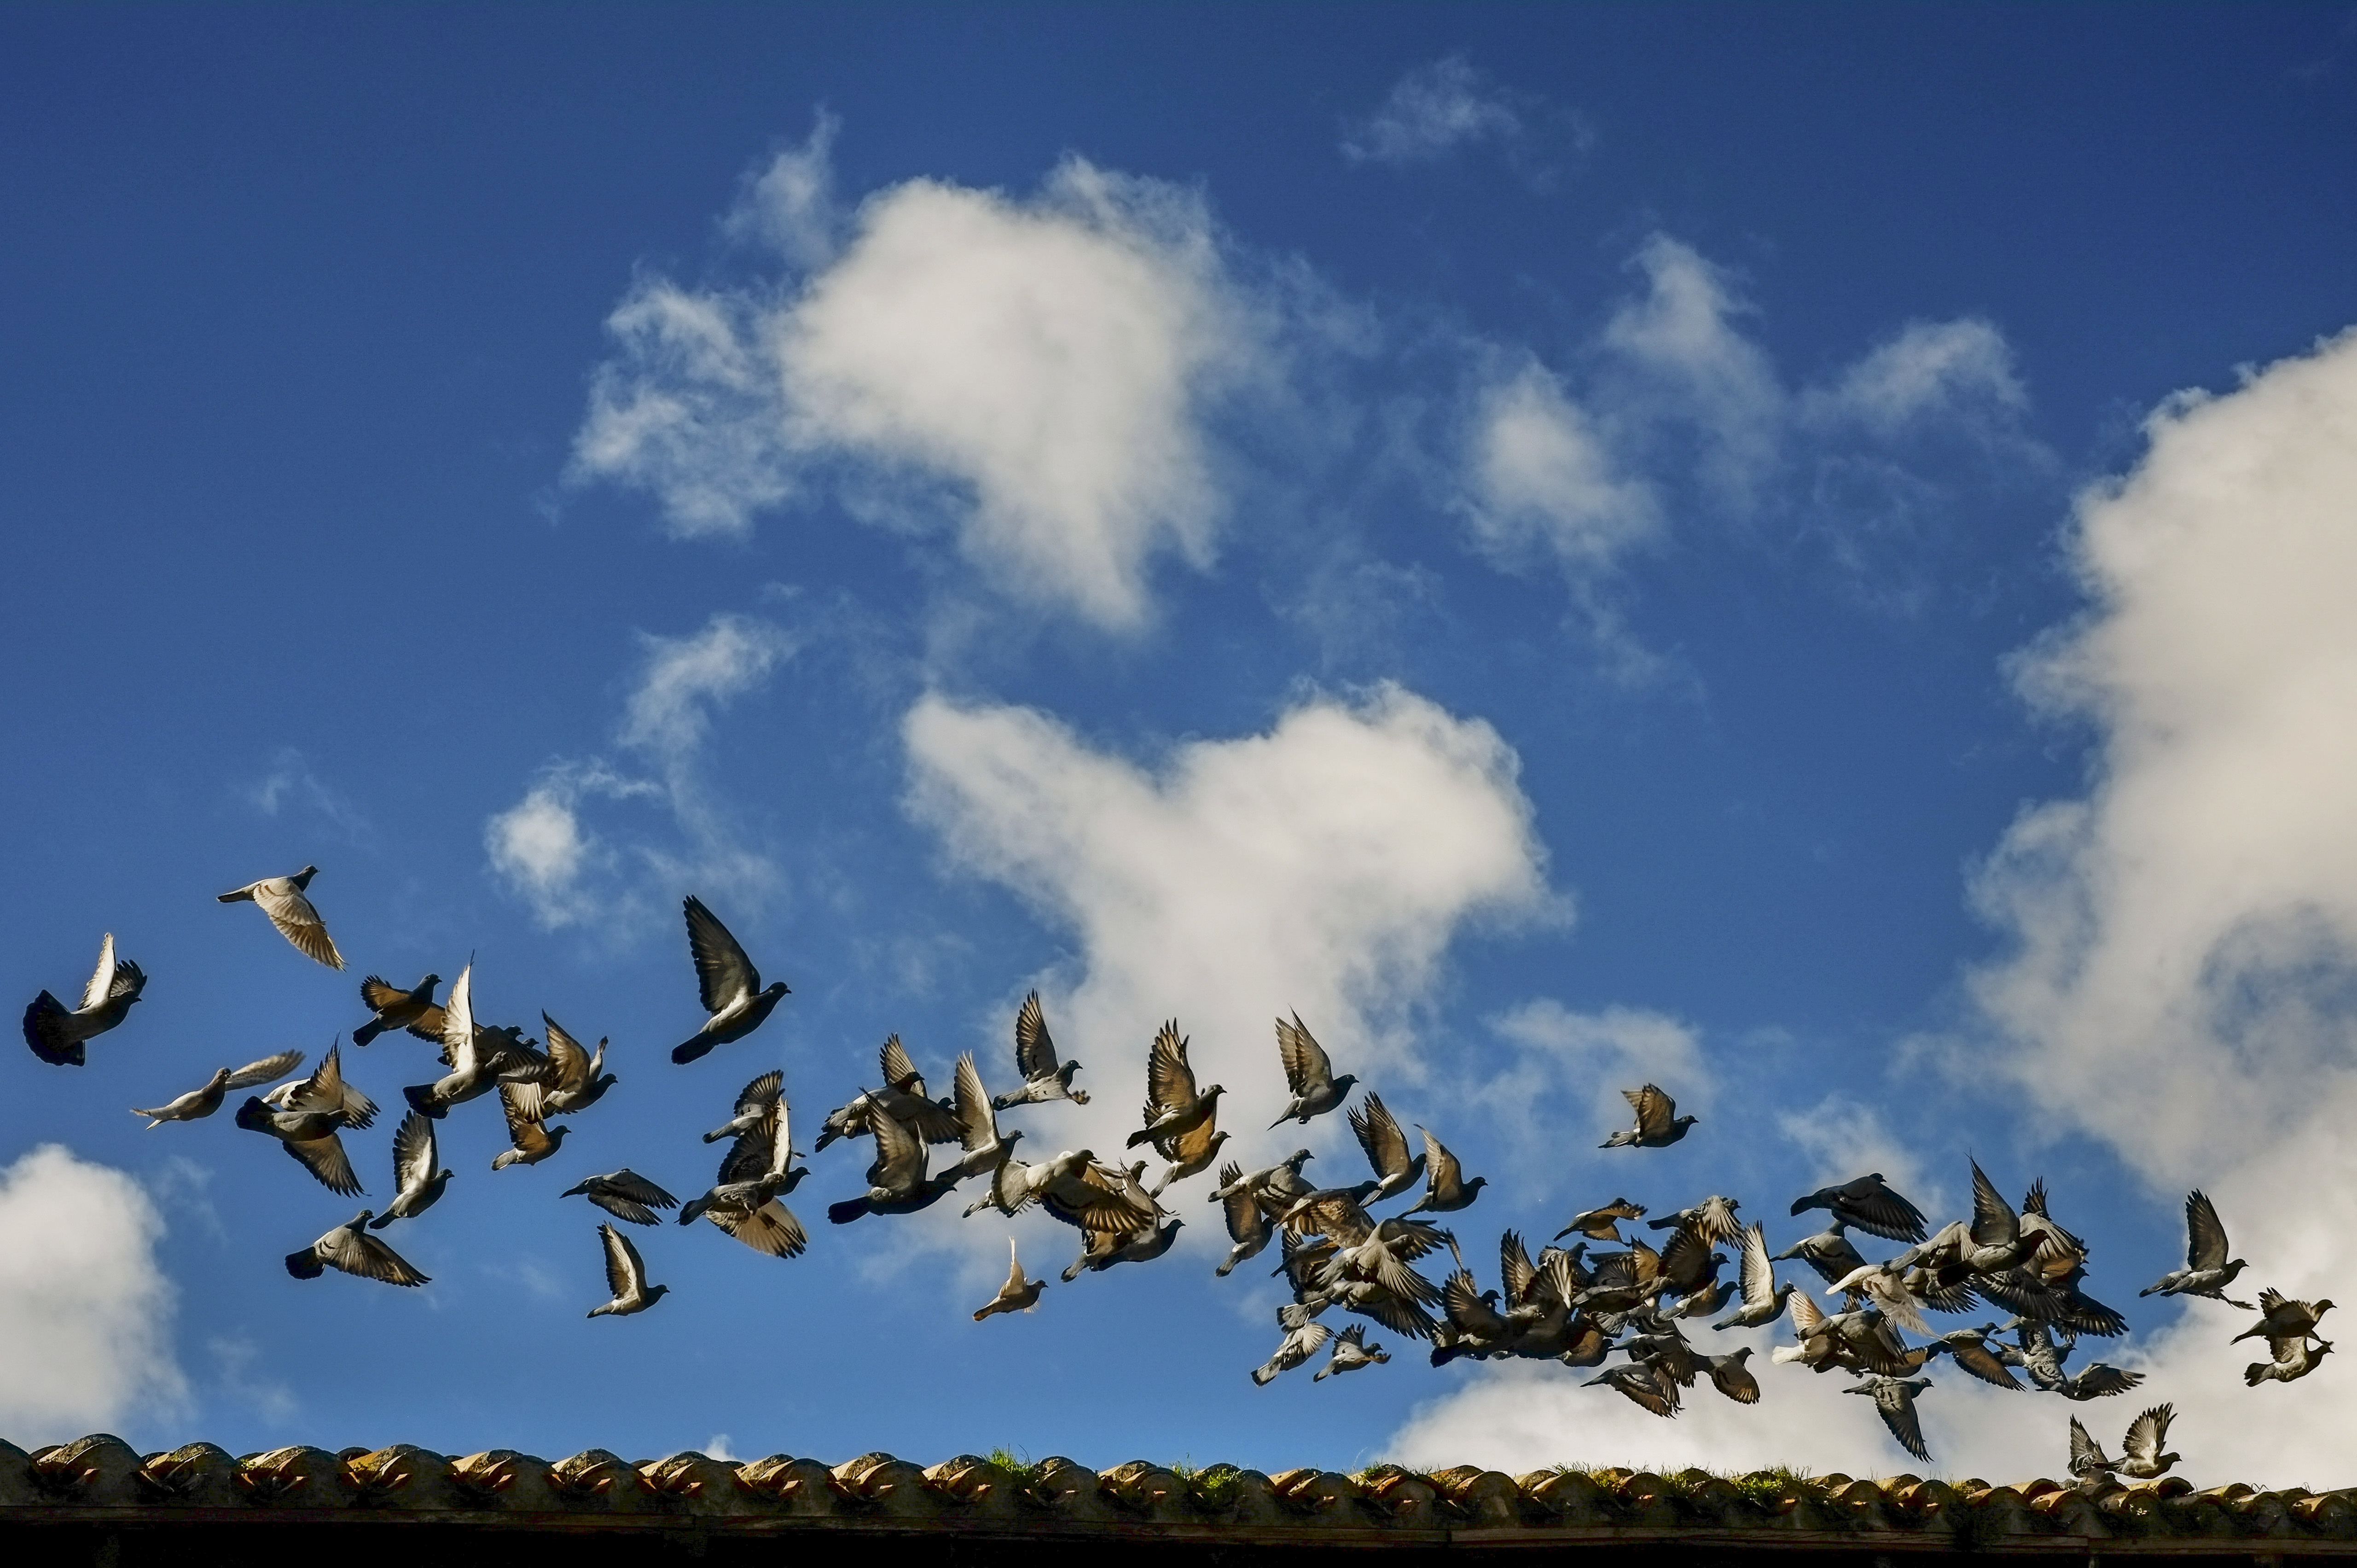 A group of pigeons fly over a tile roof during an autumn day, in Pamplona, northern Spain, Monday, Nov. 13, 2017. (AP Photo/Alvaro Barrientos)